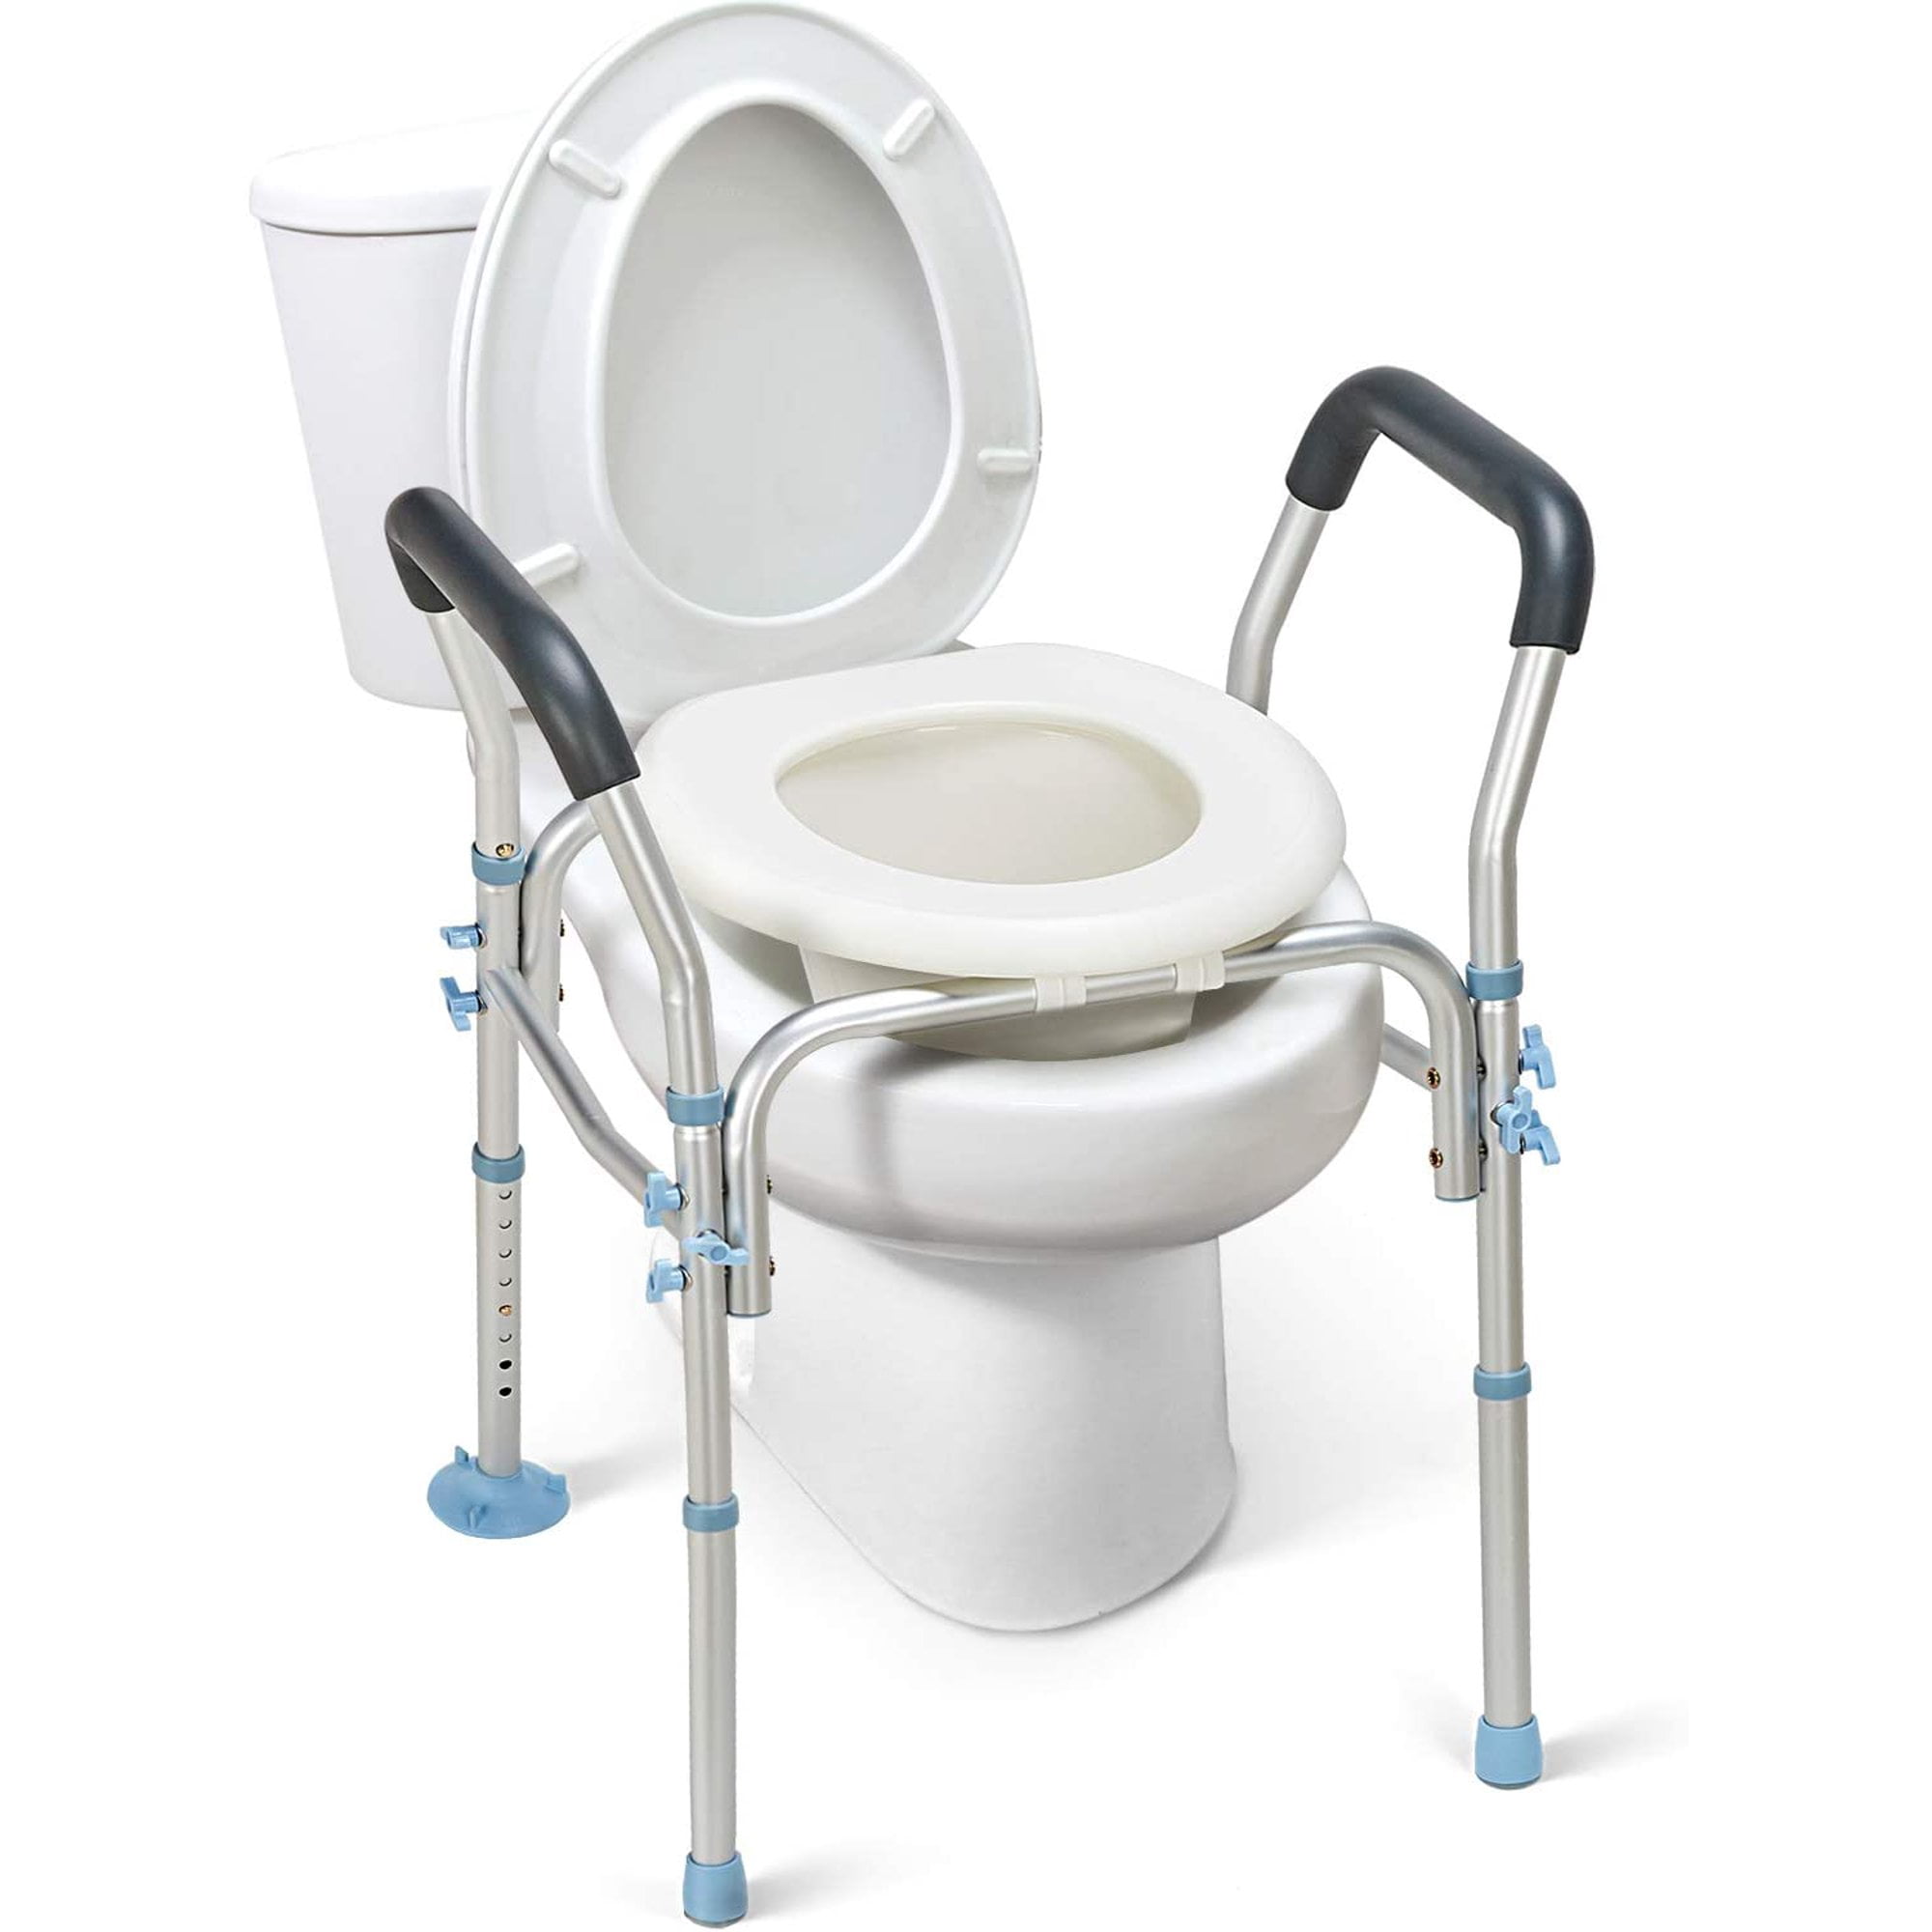 Centrum overschot voor OasisSpace Heavy Duty Stand Alone Toilet Rail - Medical Raised Homecare  Commode and Safety Frame with Height Adjustable Legs, Bathroom Assist  Toilet Frame Support Up to 300lbs - Walmart.com